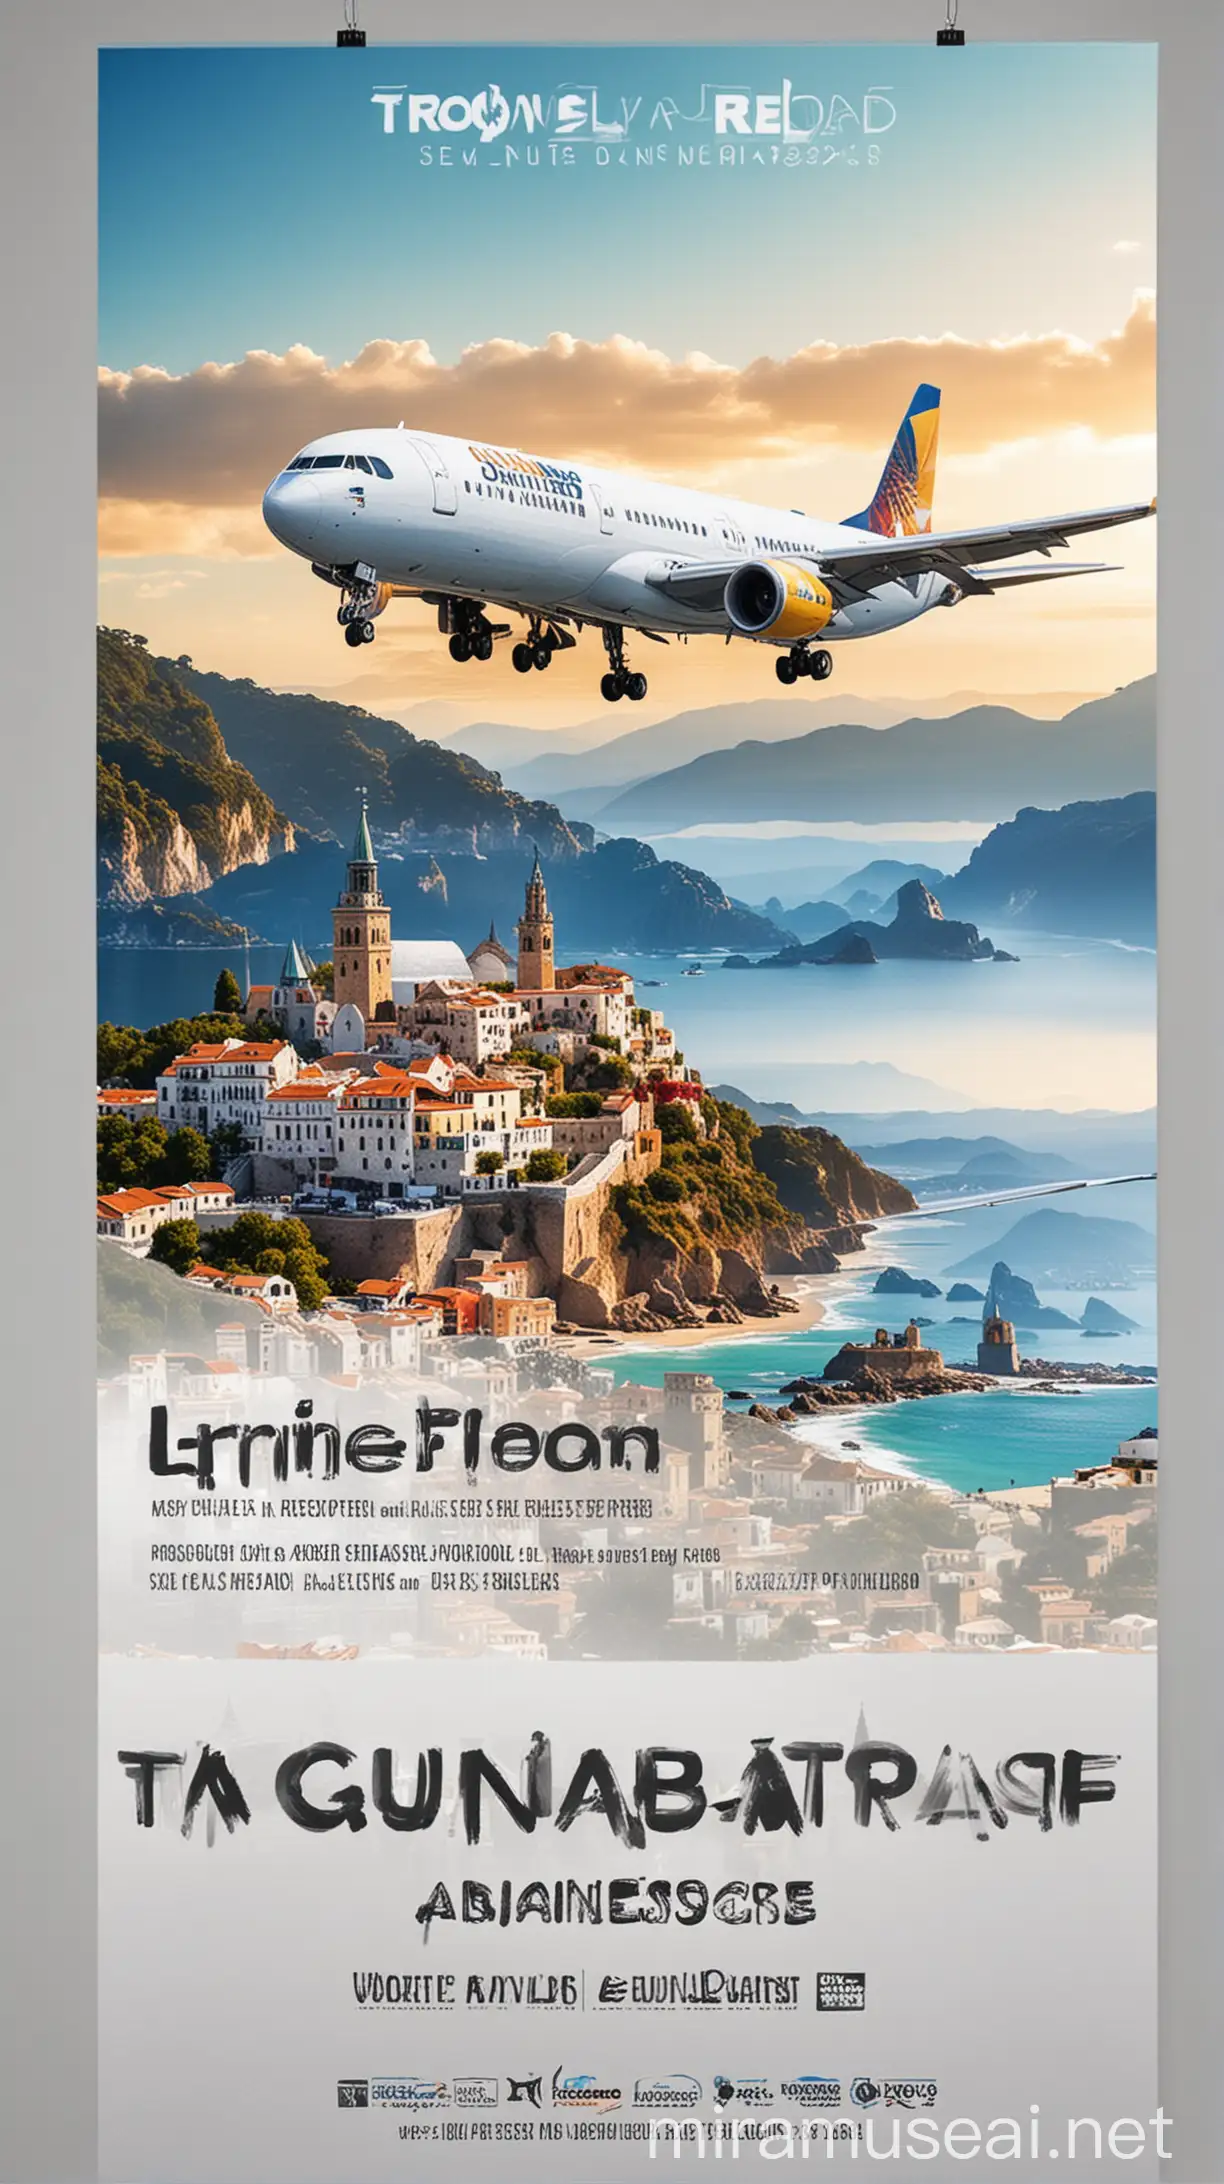 Stunning Travel Agency Banner Showcasing Exotic Destinations and Adventure Activities